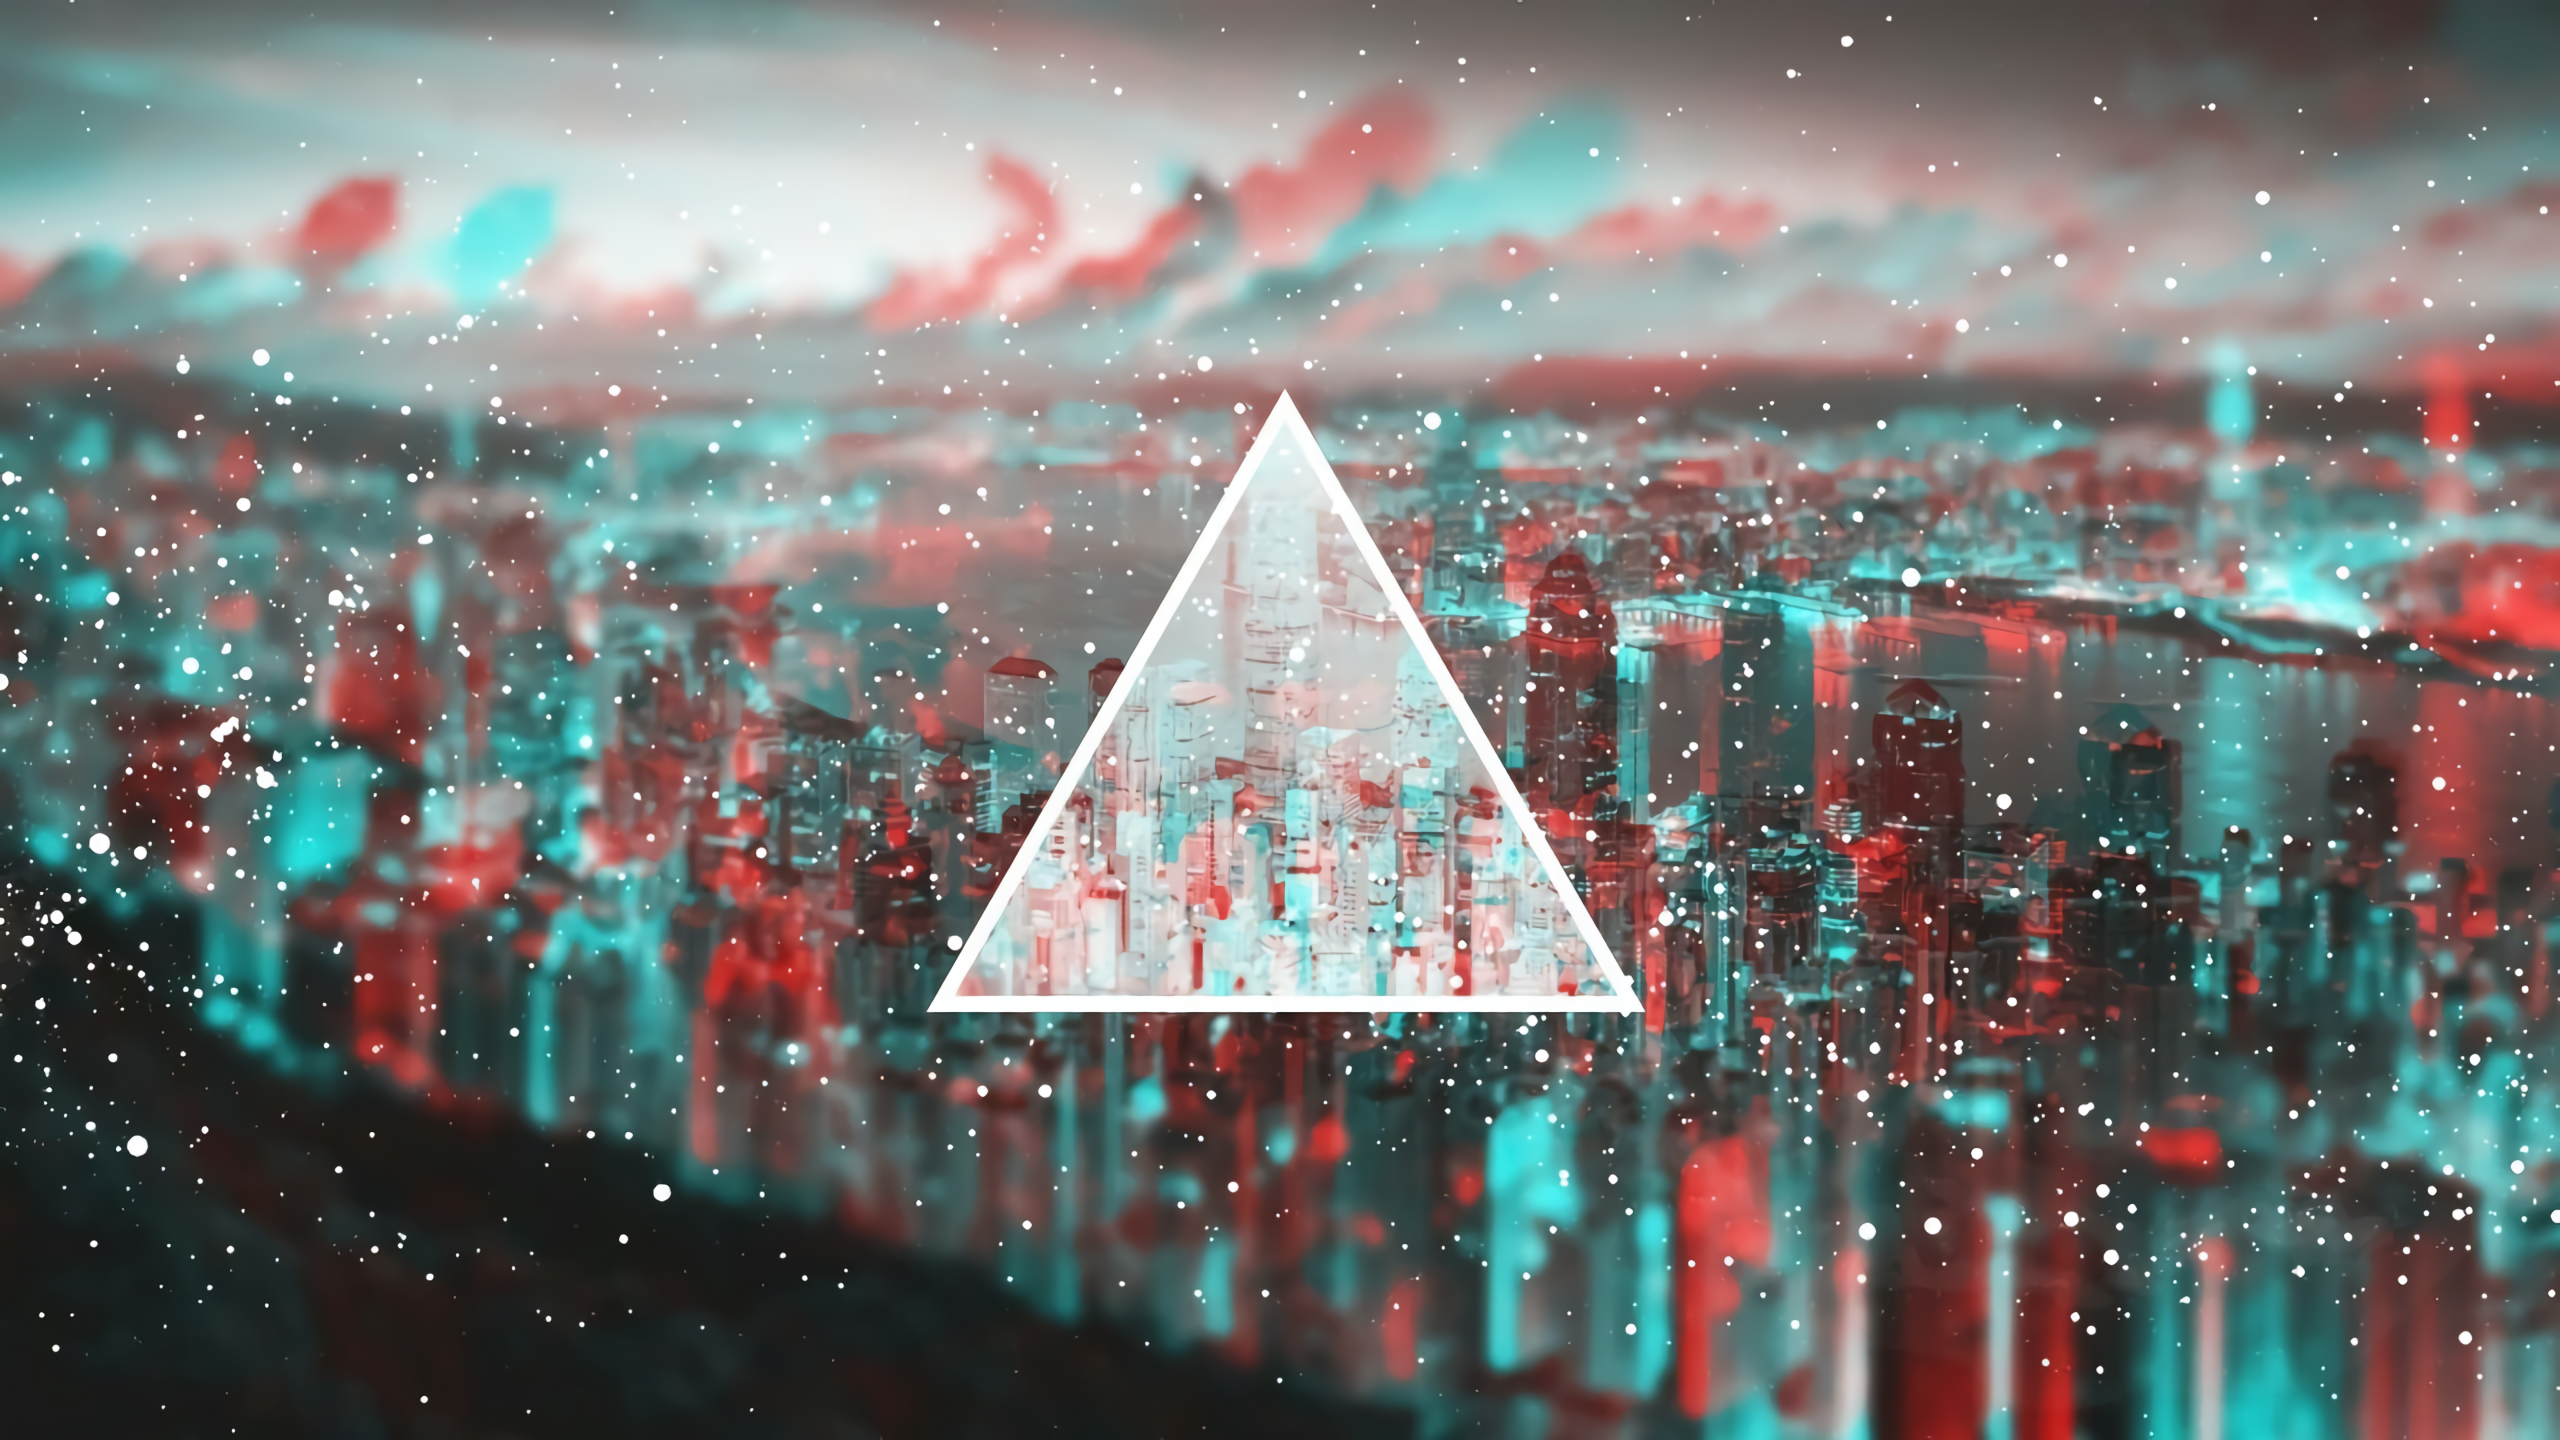 General 2560x1440 city triangle colorful inverted digital art floating particles cyan red